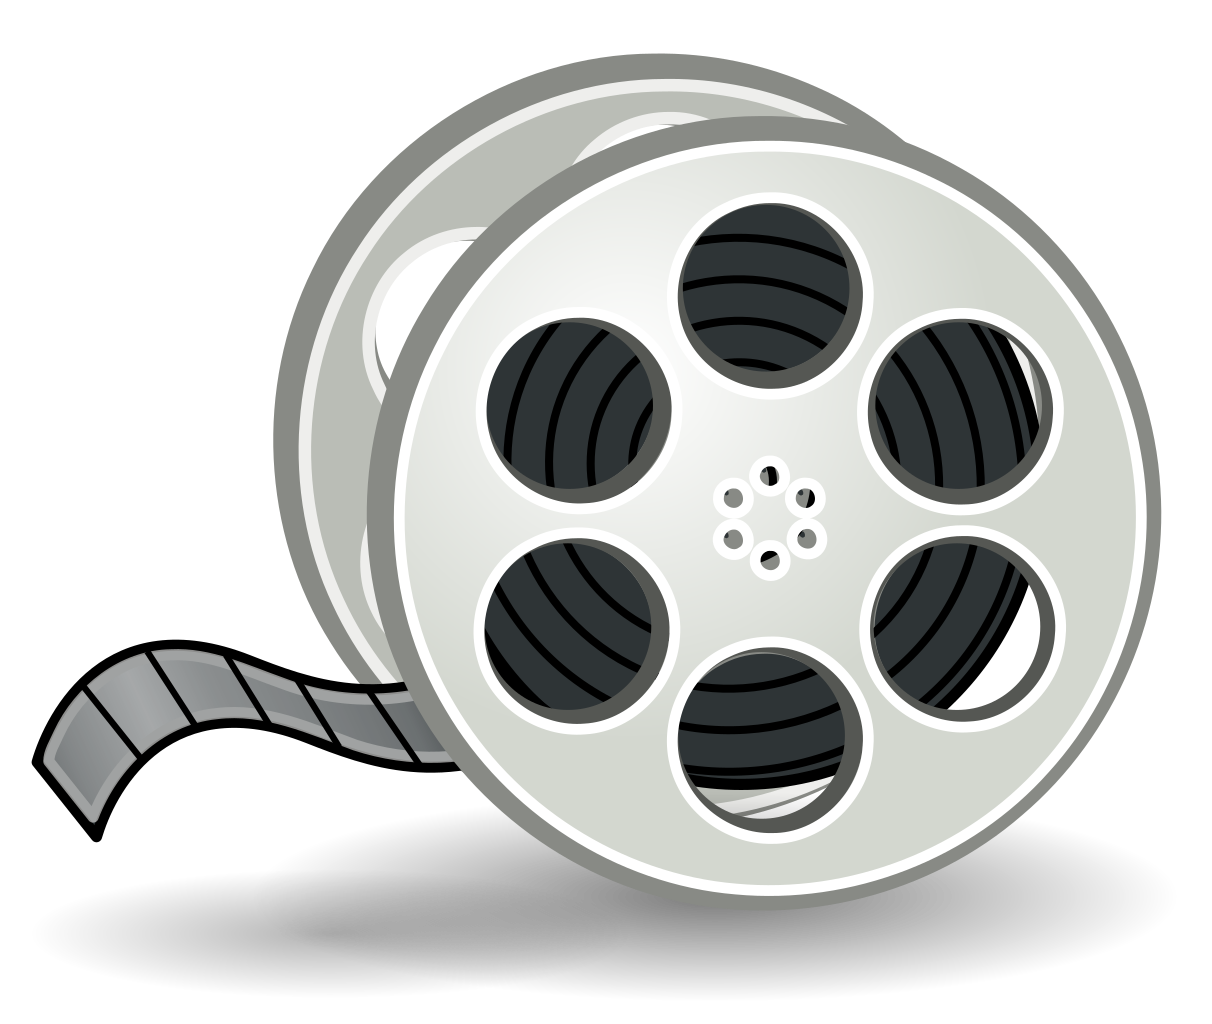 File Video film  svg Wikimedia Commons